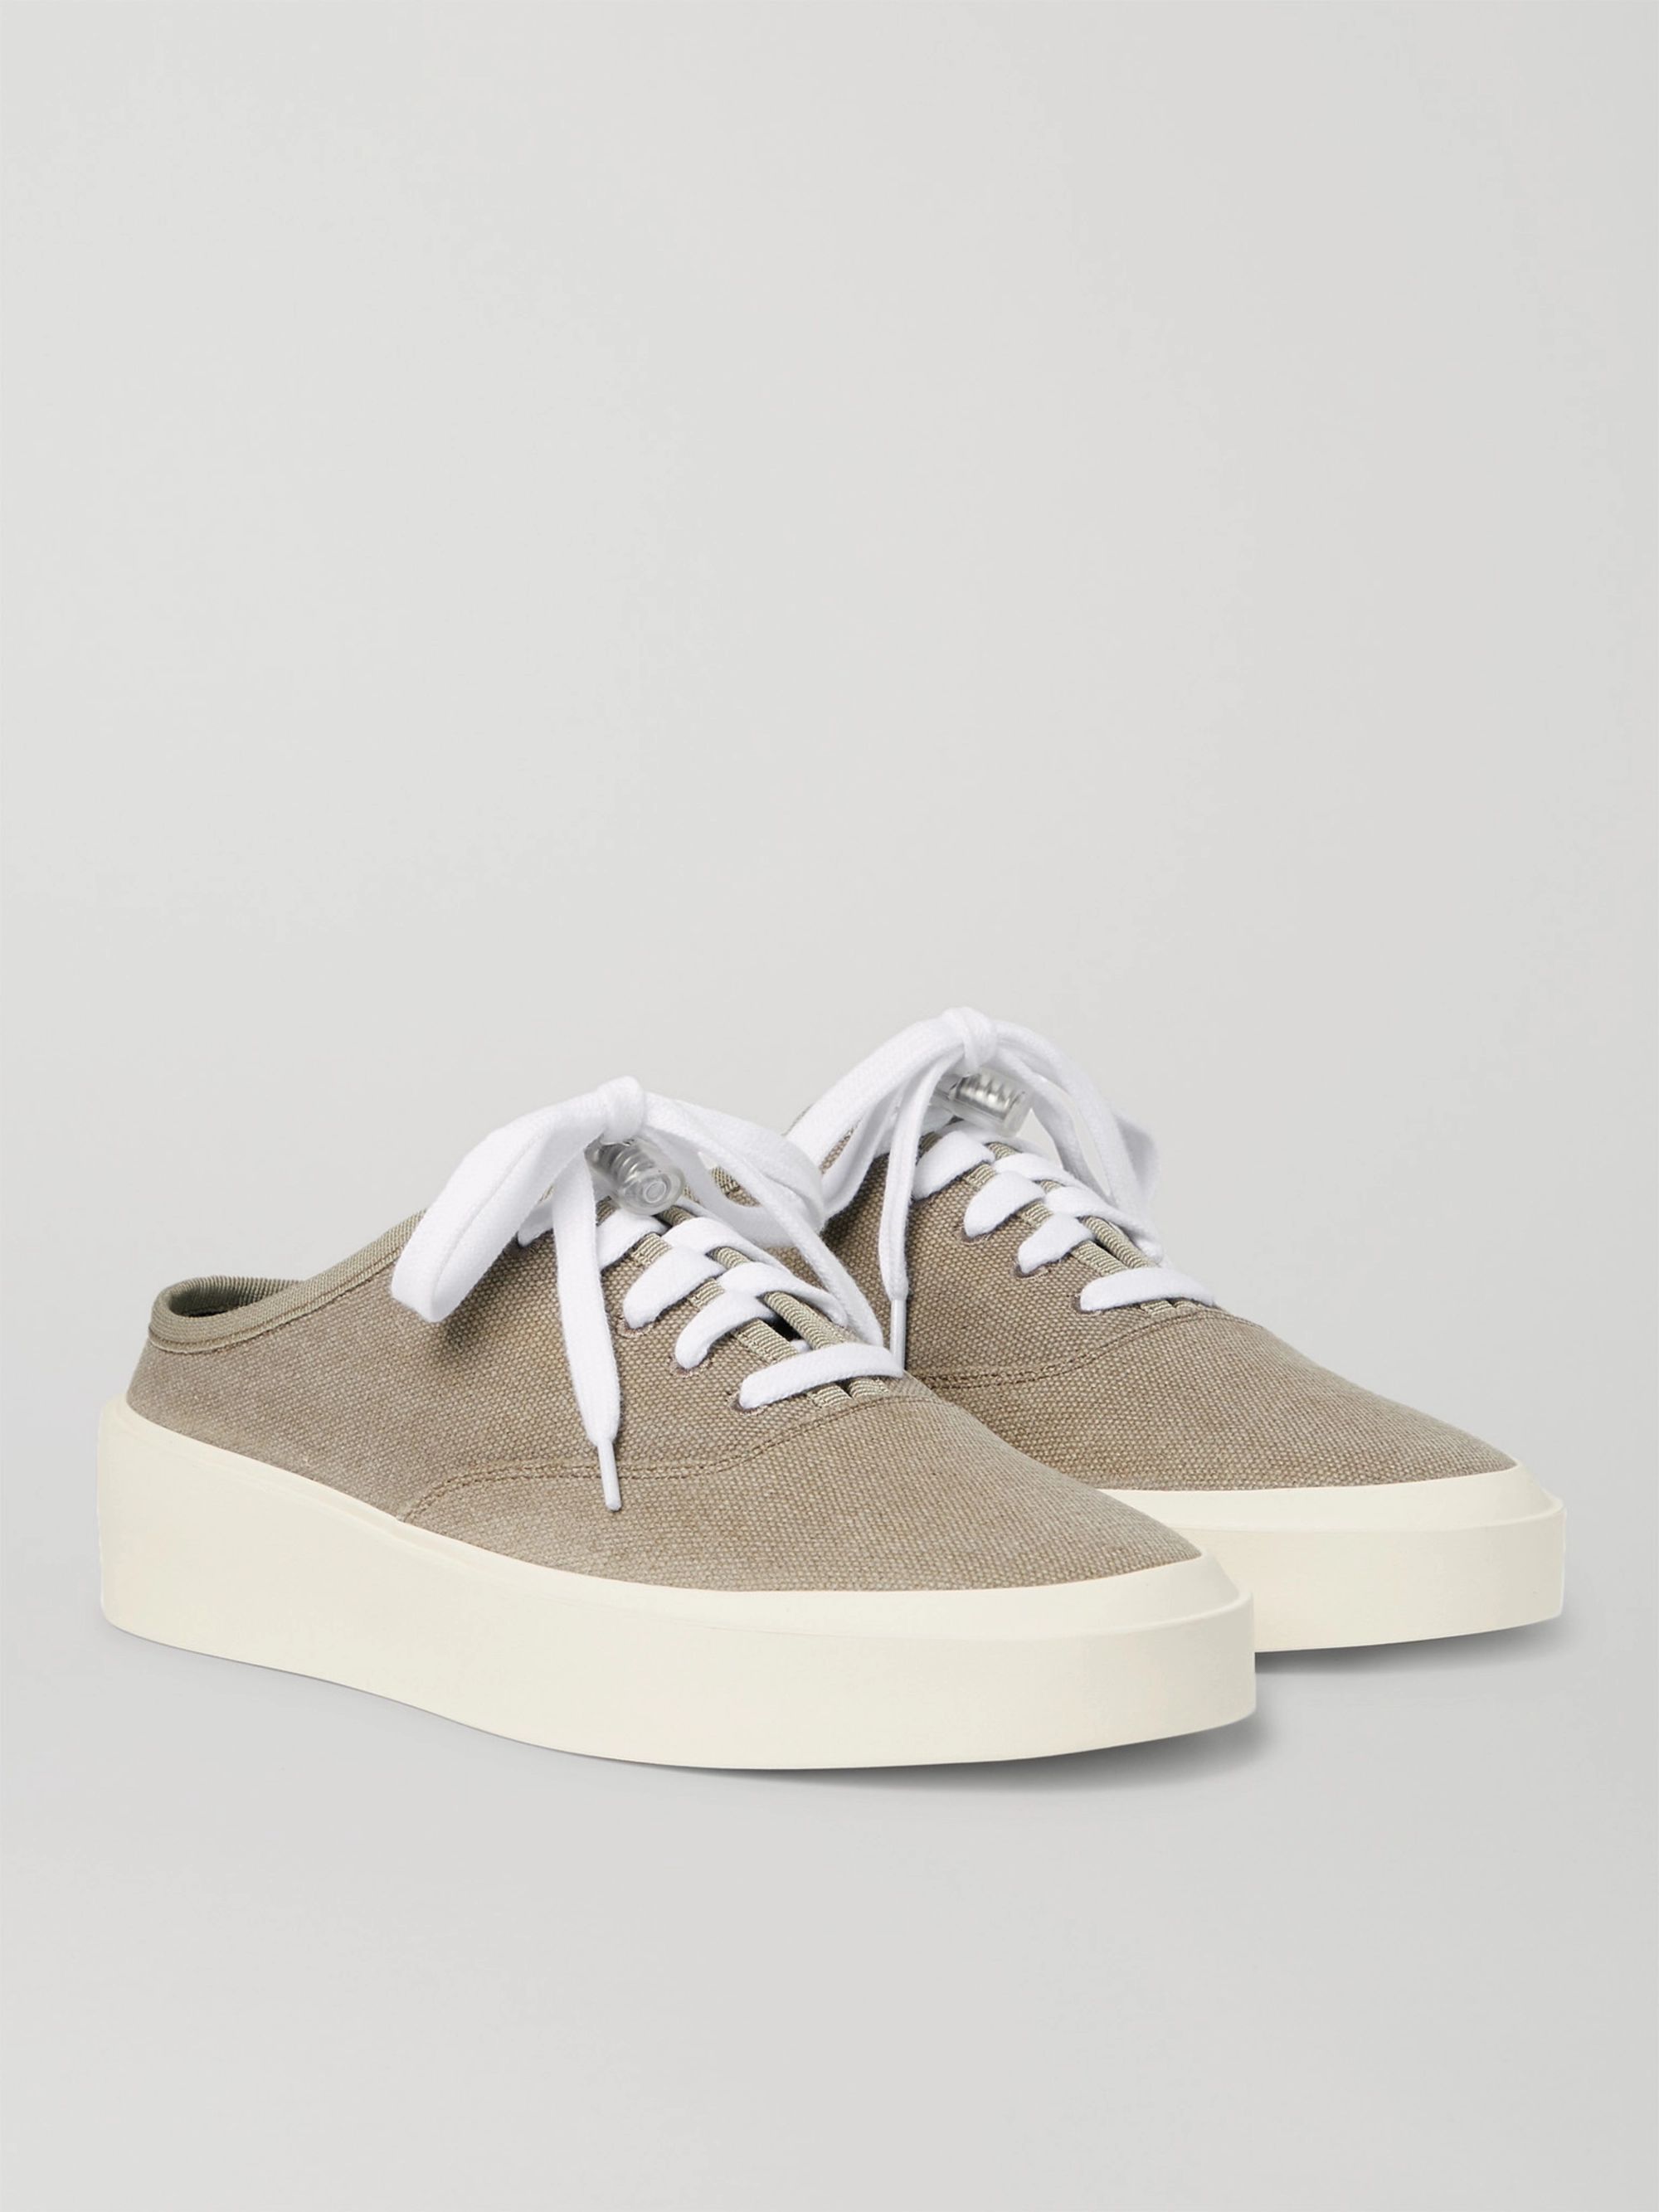 fear of god backless sneakers